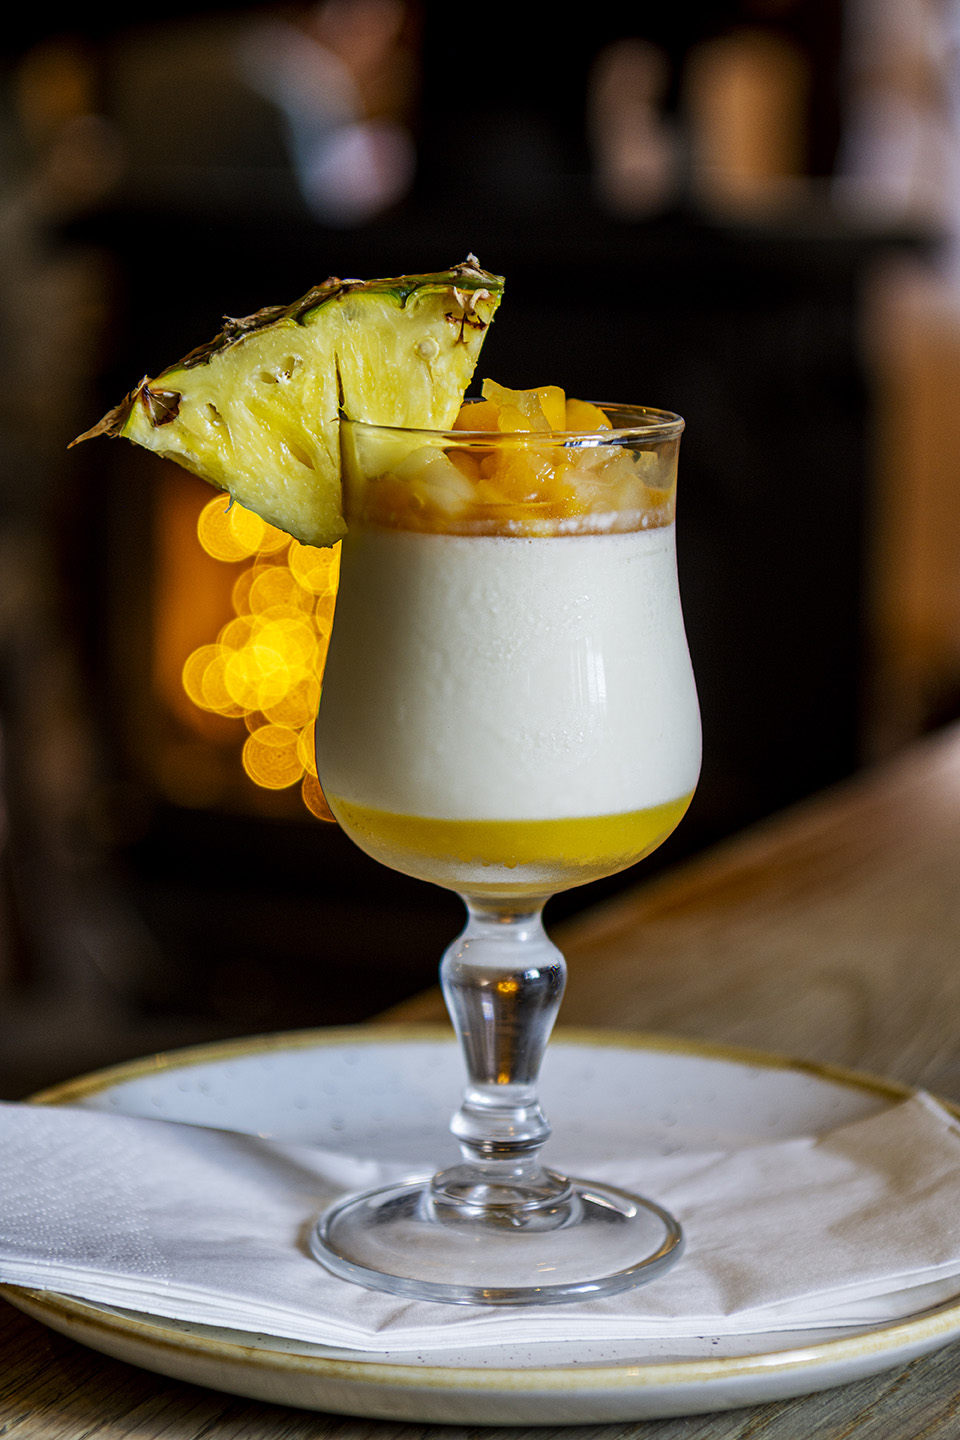 Image shows a close up of a dessert in a tall glass with the slice of pineapple on the rim